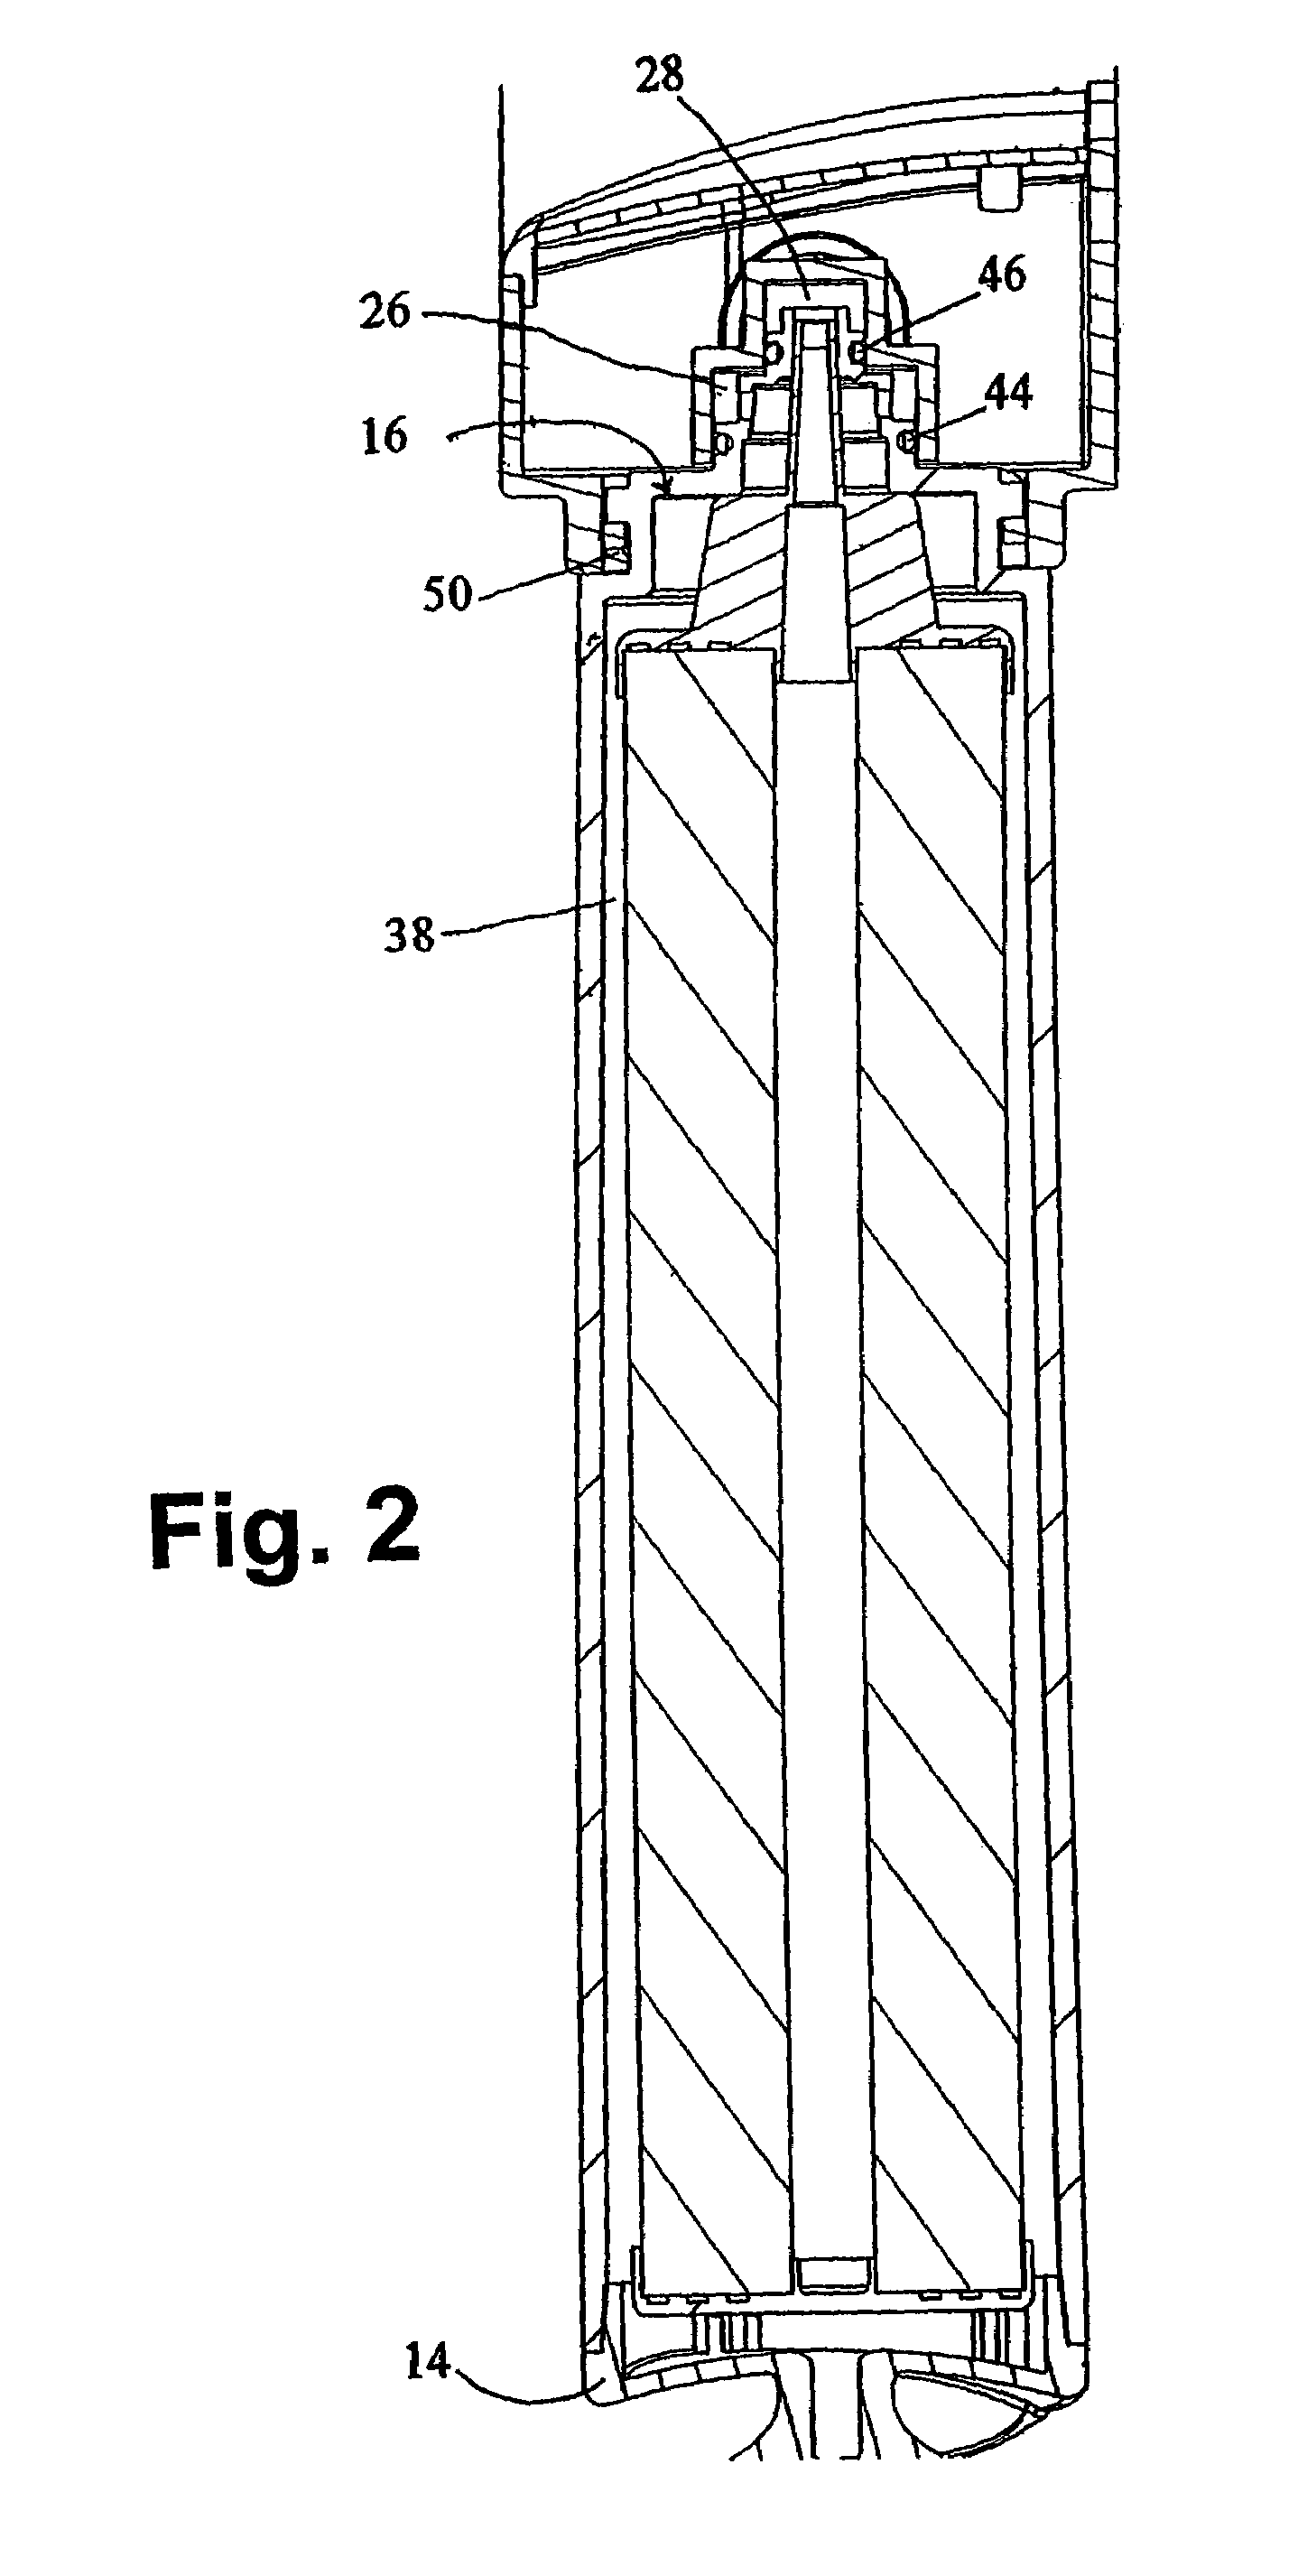 Fluid filter apparatus and method